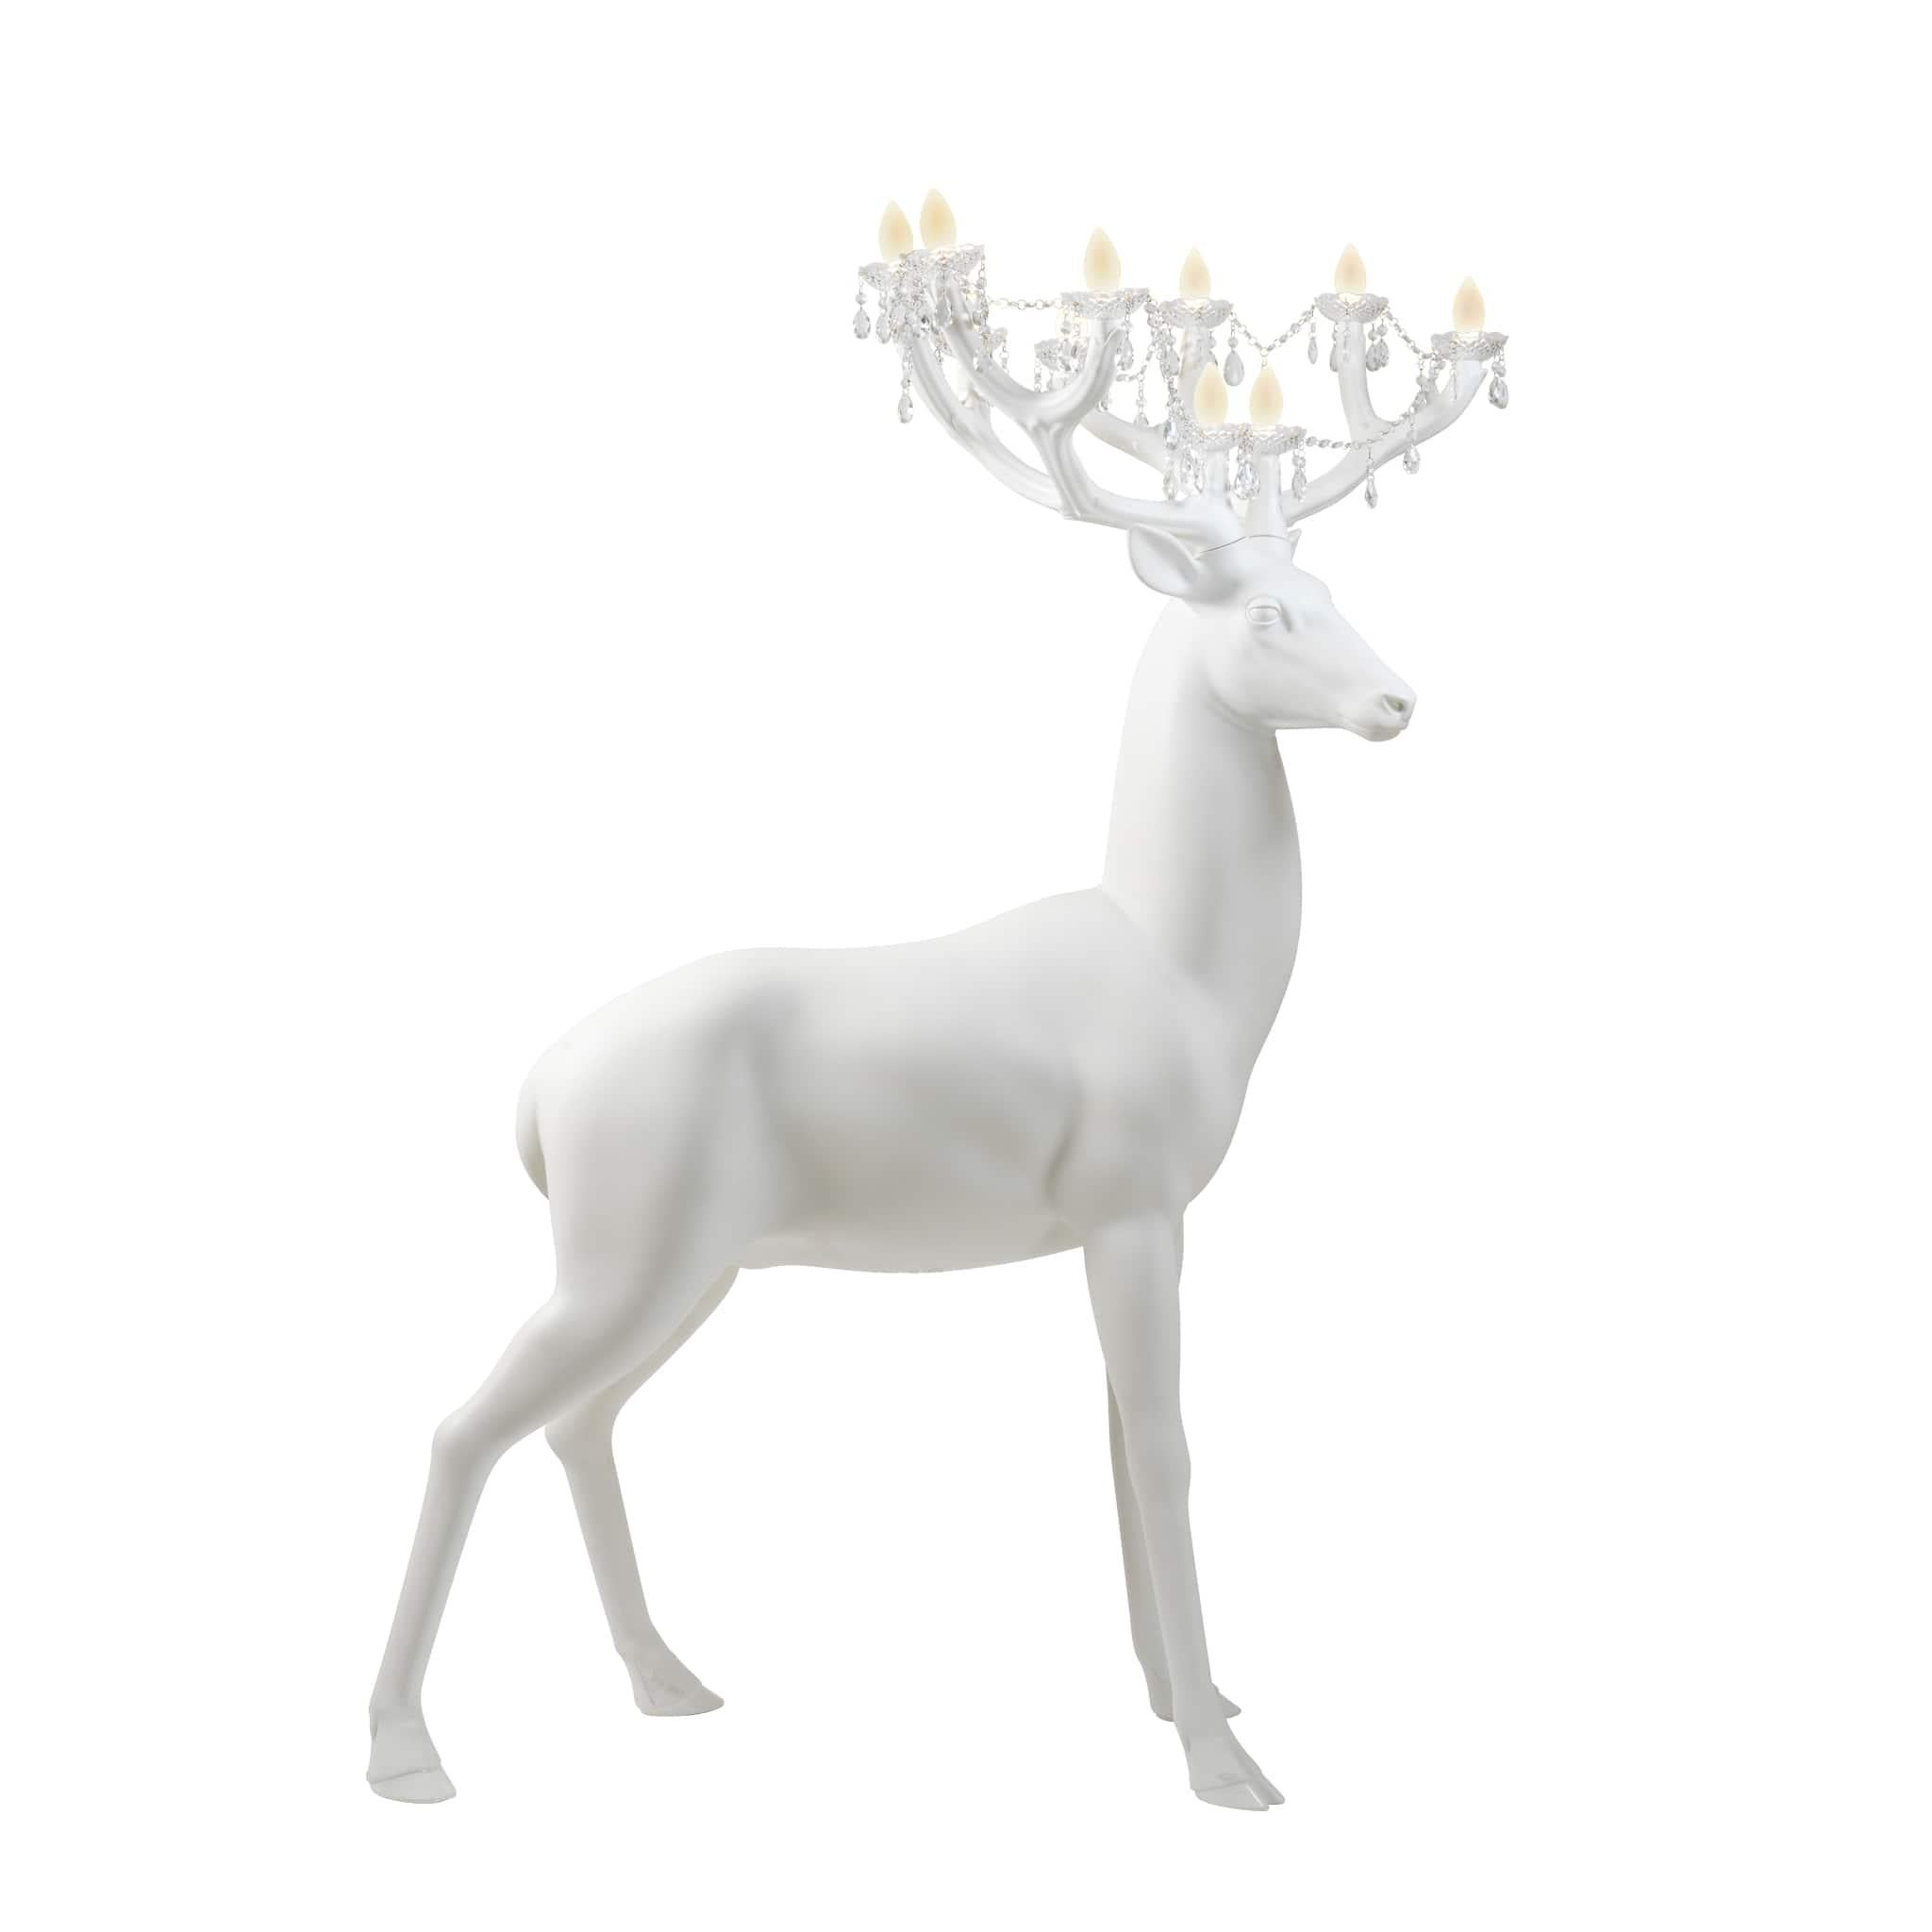 6.5ft tall white sherwood deer chandelier by Marcantonio

Sherwood is an impressive 2-meter-high deer whose antlers become chandeliers decorated with crystals and pendants.
The strong natural energy of the animal is immortalized by Marcantonio